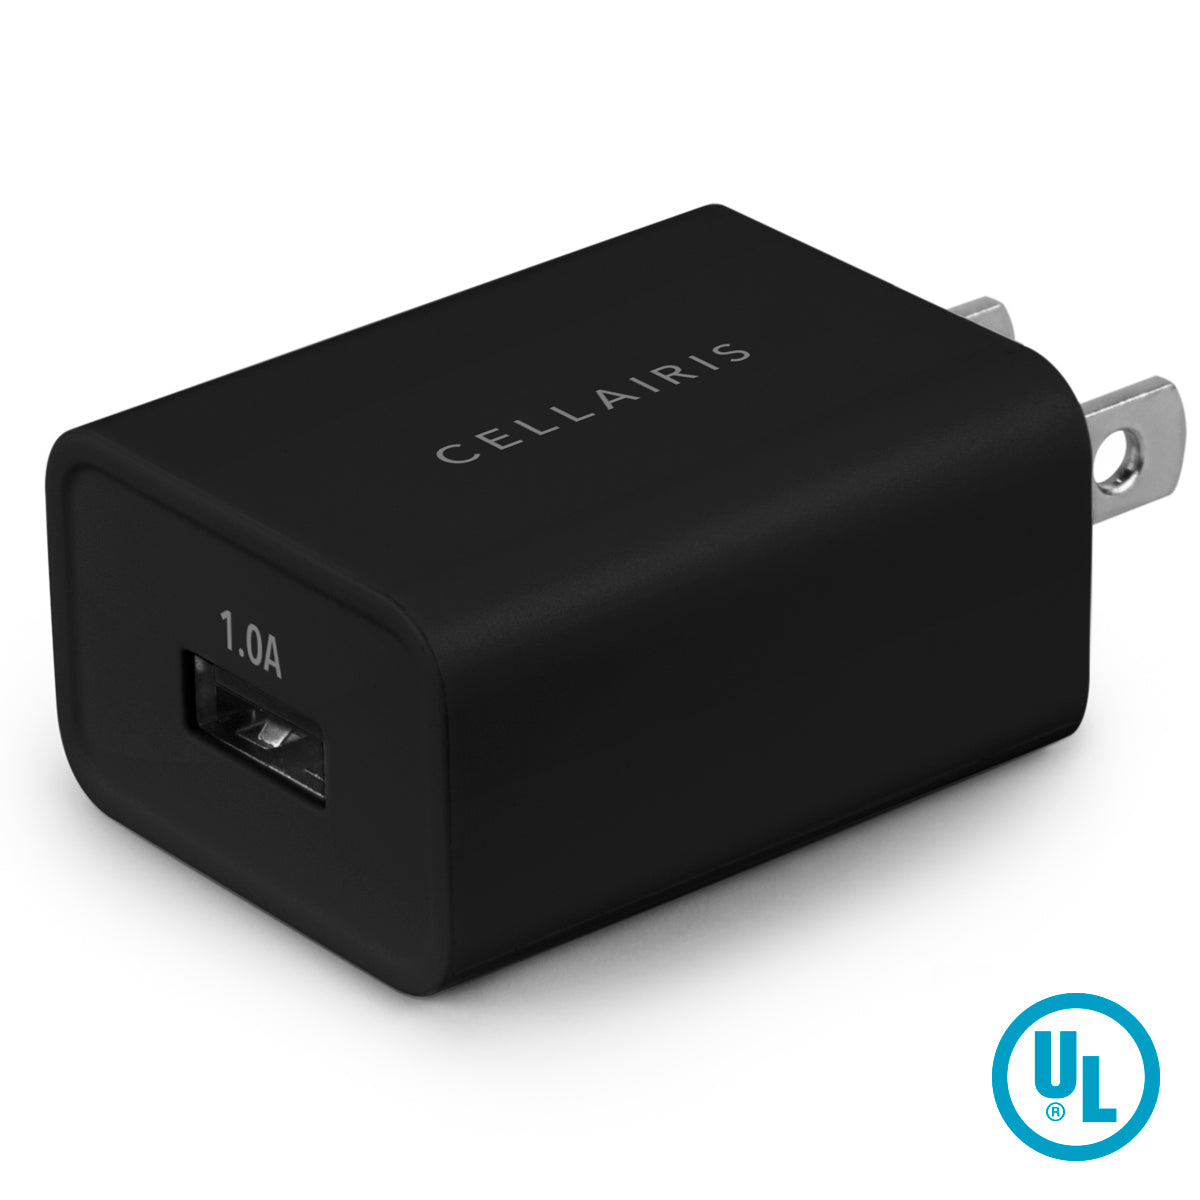 Cellairis Wall Charger - Dual USB-A 4.8A (2.4A + 2.4A) Black Wall Chargers